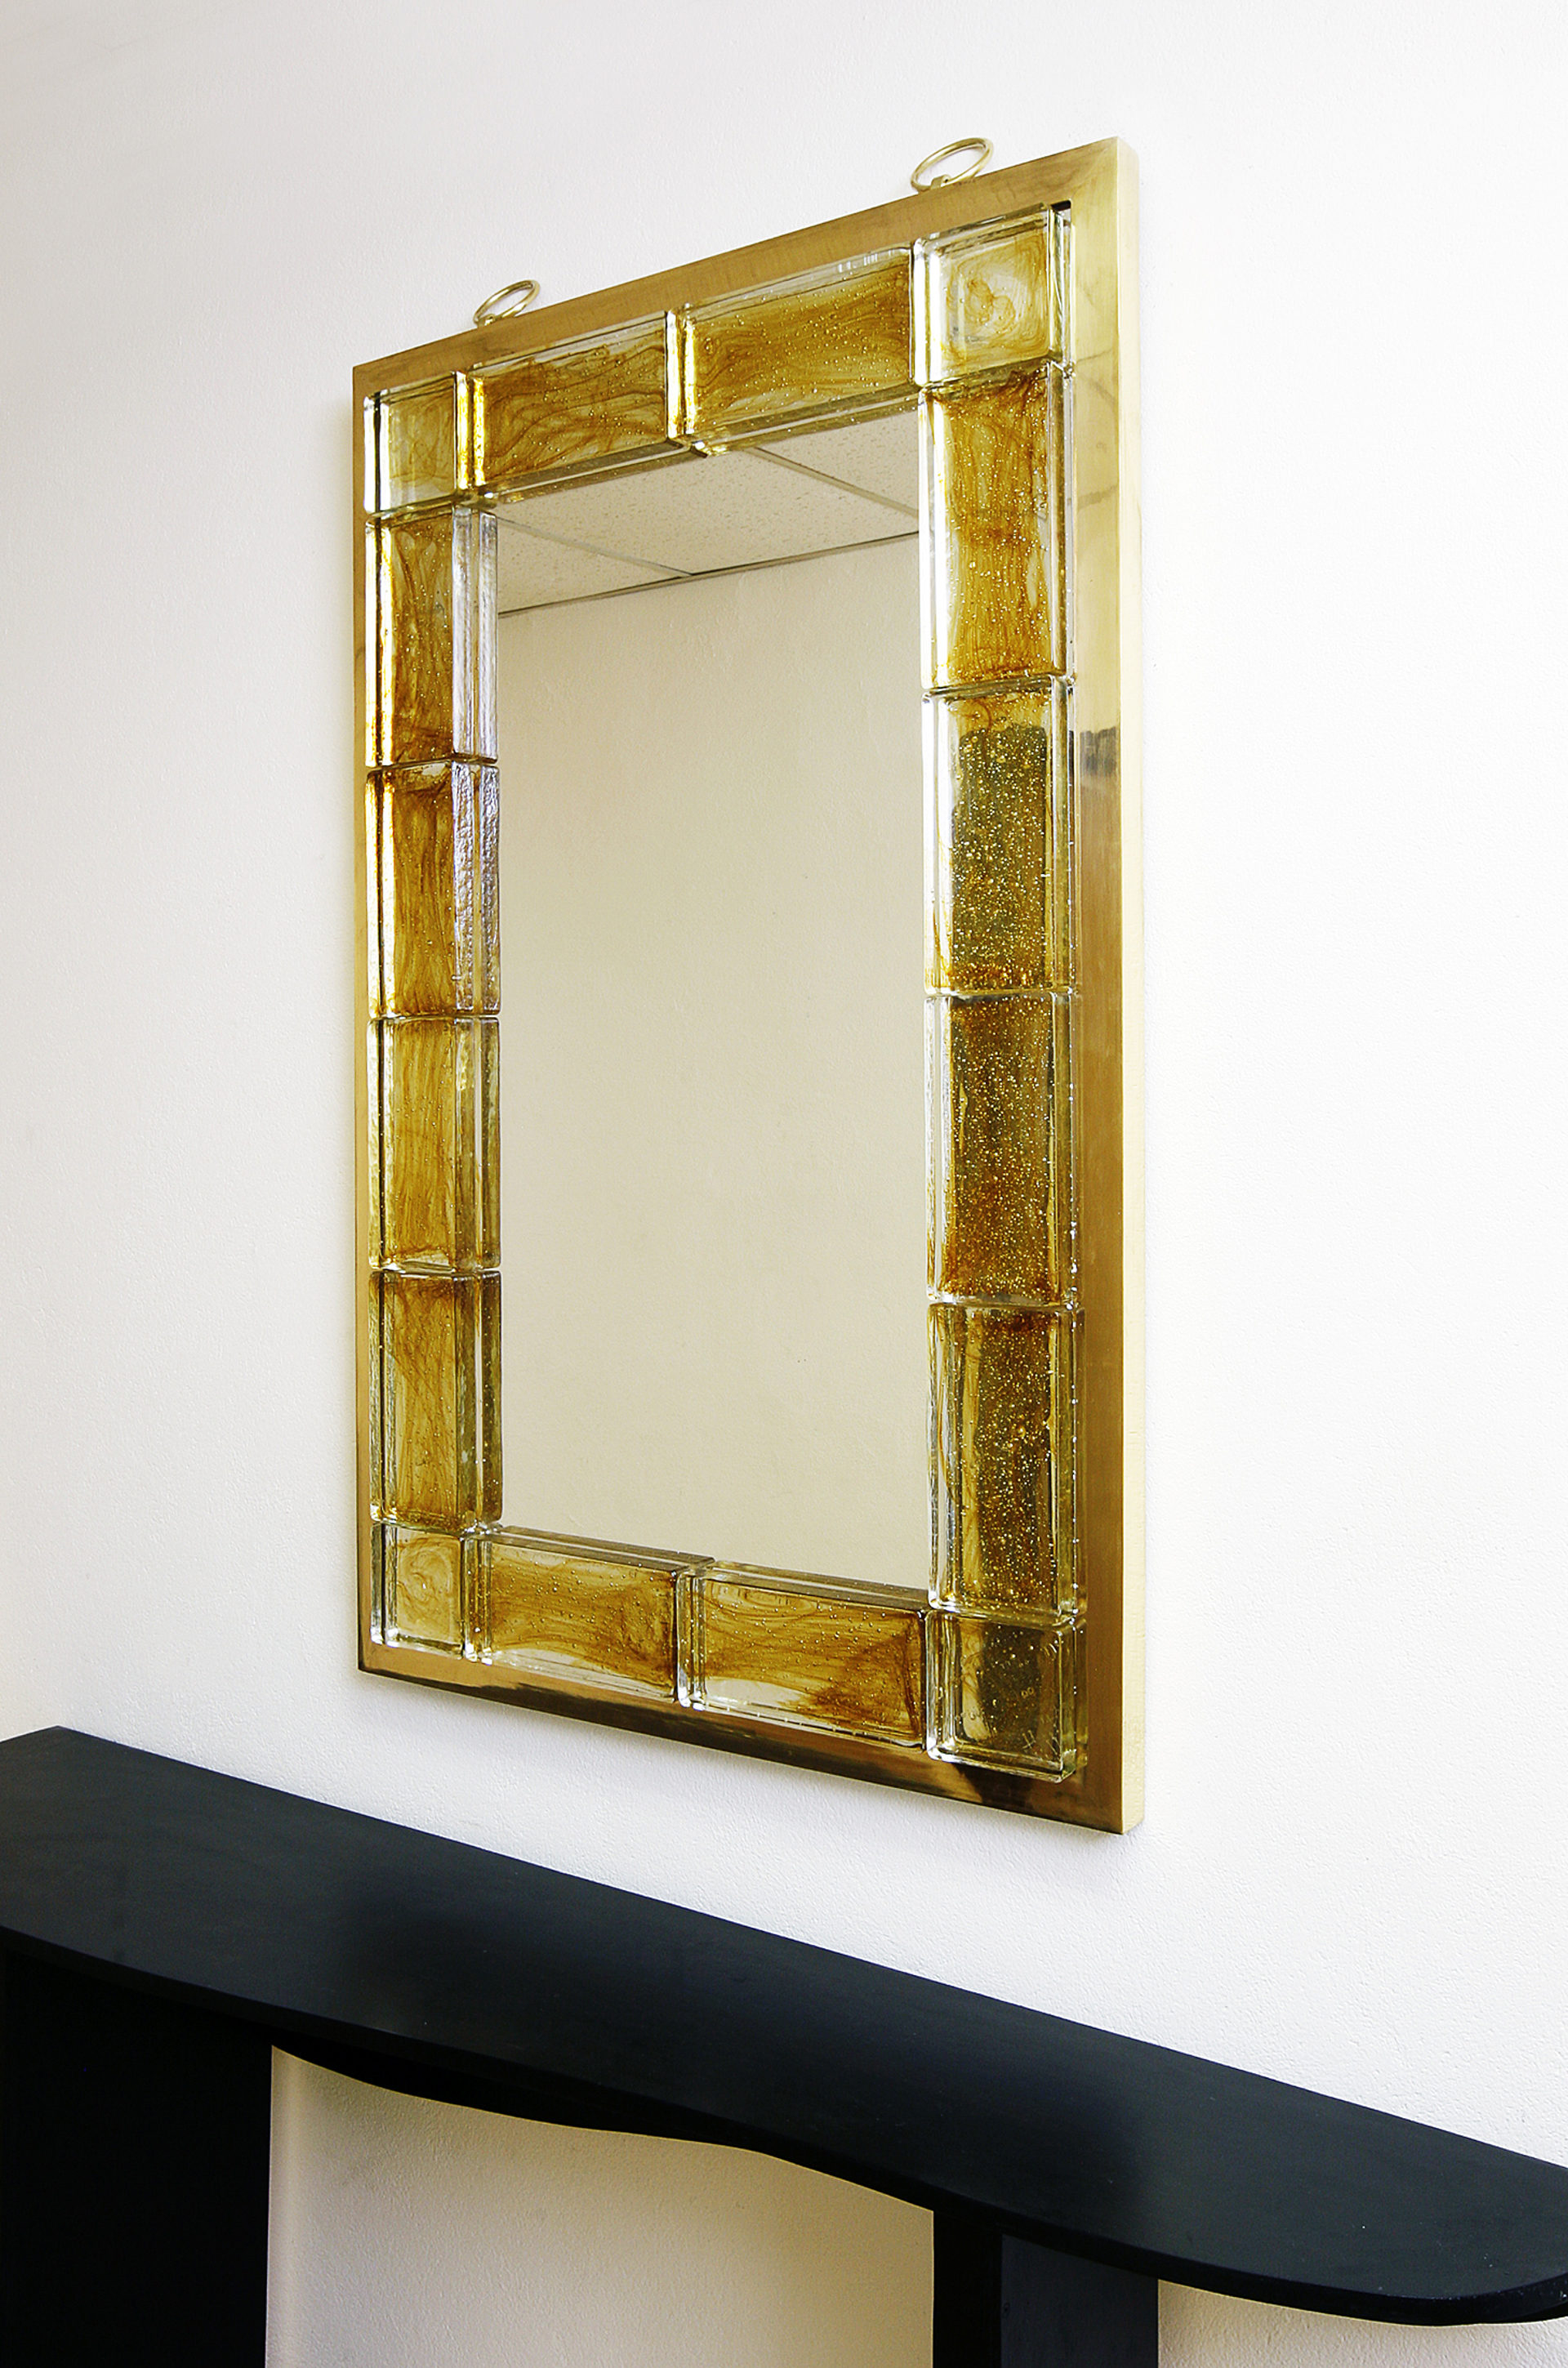 Glass tiled mirror by Andre Hayat